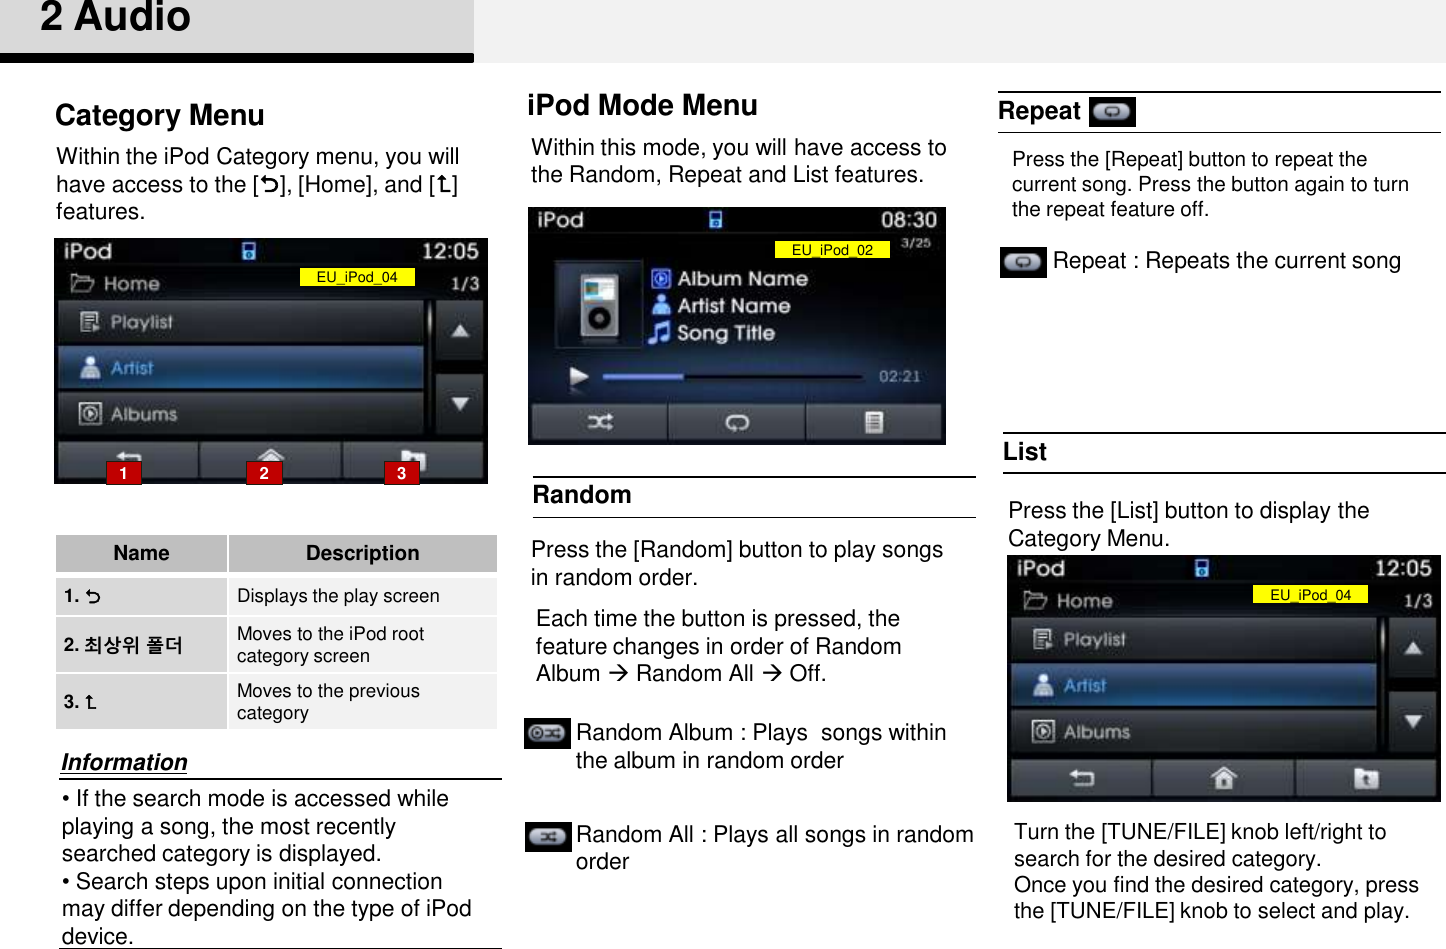 RepeatRandom2 AudioPress the [Random] button to play songs in random order. iPod Mode MenuListPress the [List] button to display the Category Menu. • If the search mode is accessed while playing a song, the most recently searched category is displayed.• Search steps upon initial connection may differ depending on the type of iPod device. InformationCategory Menu1 2 3NameDescription1. Displays the play screen2. 최상위 폴더 Moves to the iPod root category screen 3. Moves to the previous categoryWithin the iPod Category menu, you will have access to the [], [Home], and [] features.Random Album : Plays  songs within the album in random orderRandom All : Plays all songs in random orderRepeat : Repeats the current songWithin this mode, you will have access to the Random, Repeat and List features. Each time the button is pressed, the feature changes in order of Random Album Random All Off.Press the [Repeat] button to repeat the current song. Press the button again to turn the repeat feature off.Turn the [TUNE/FILE] knob left/right to search for the desired category.Once you find the desired category, press the [TUNE/FILE] knob to select and play.EU_iPod_04EU_iPod_02EU_iPod_04